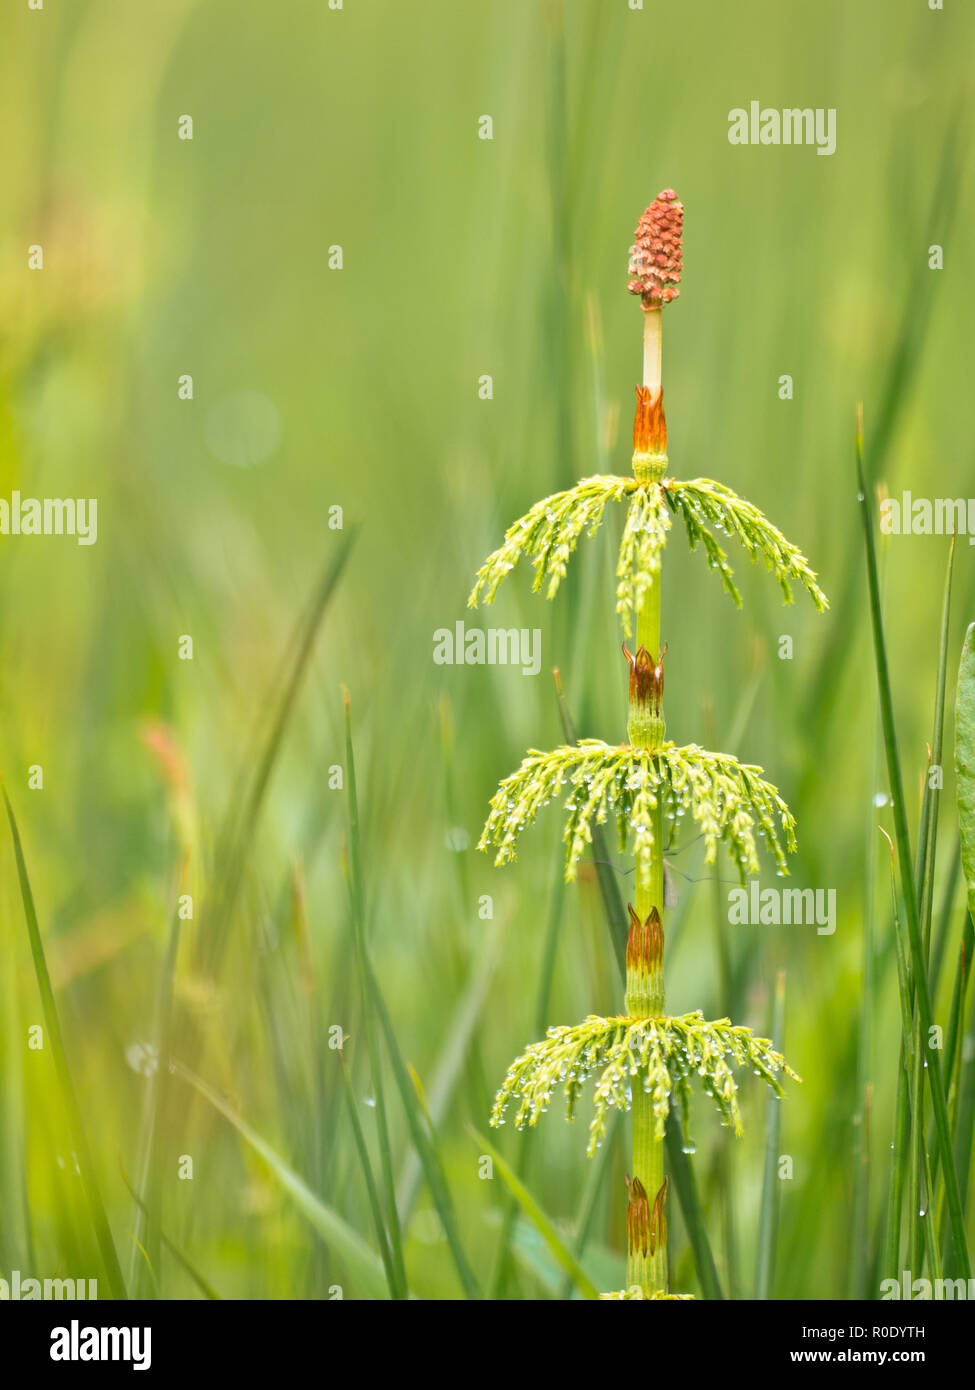 Wood horsetail (Equisetum sylvaticum) in a field with shallow depth Stock Photo